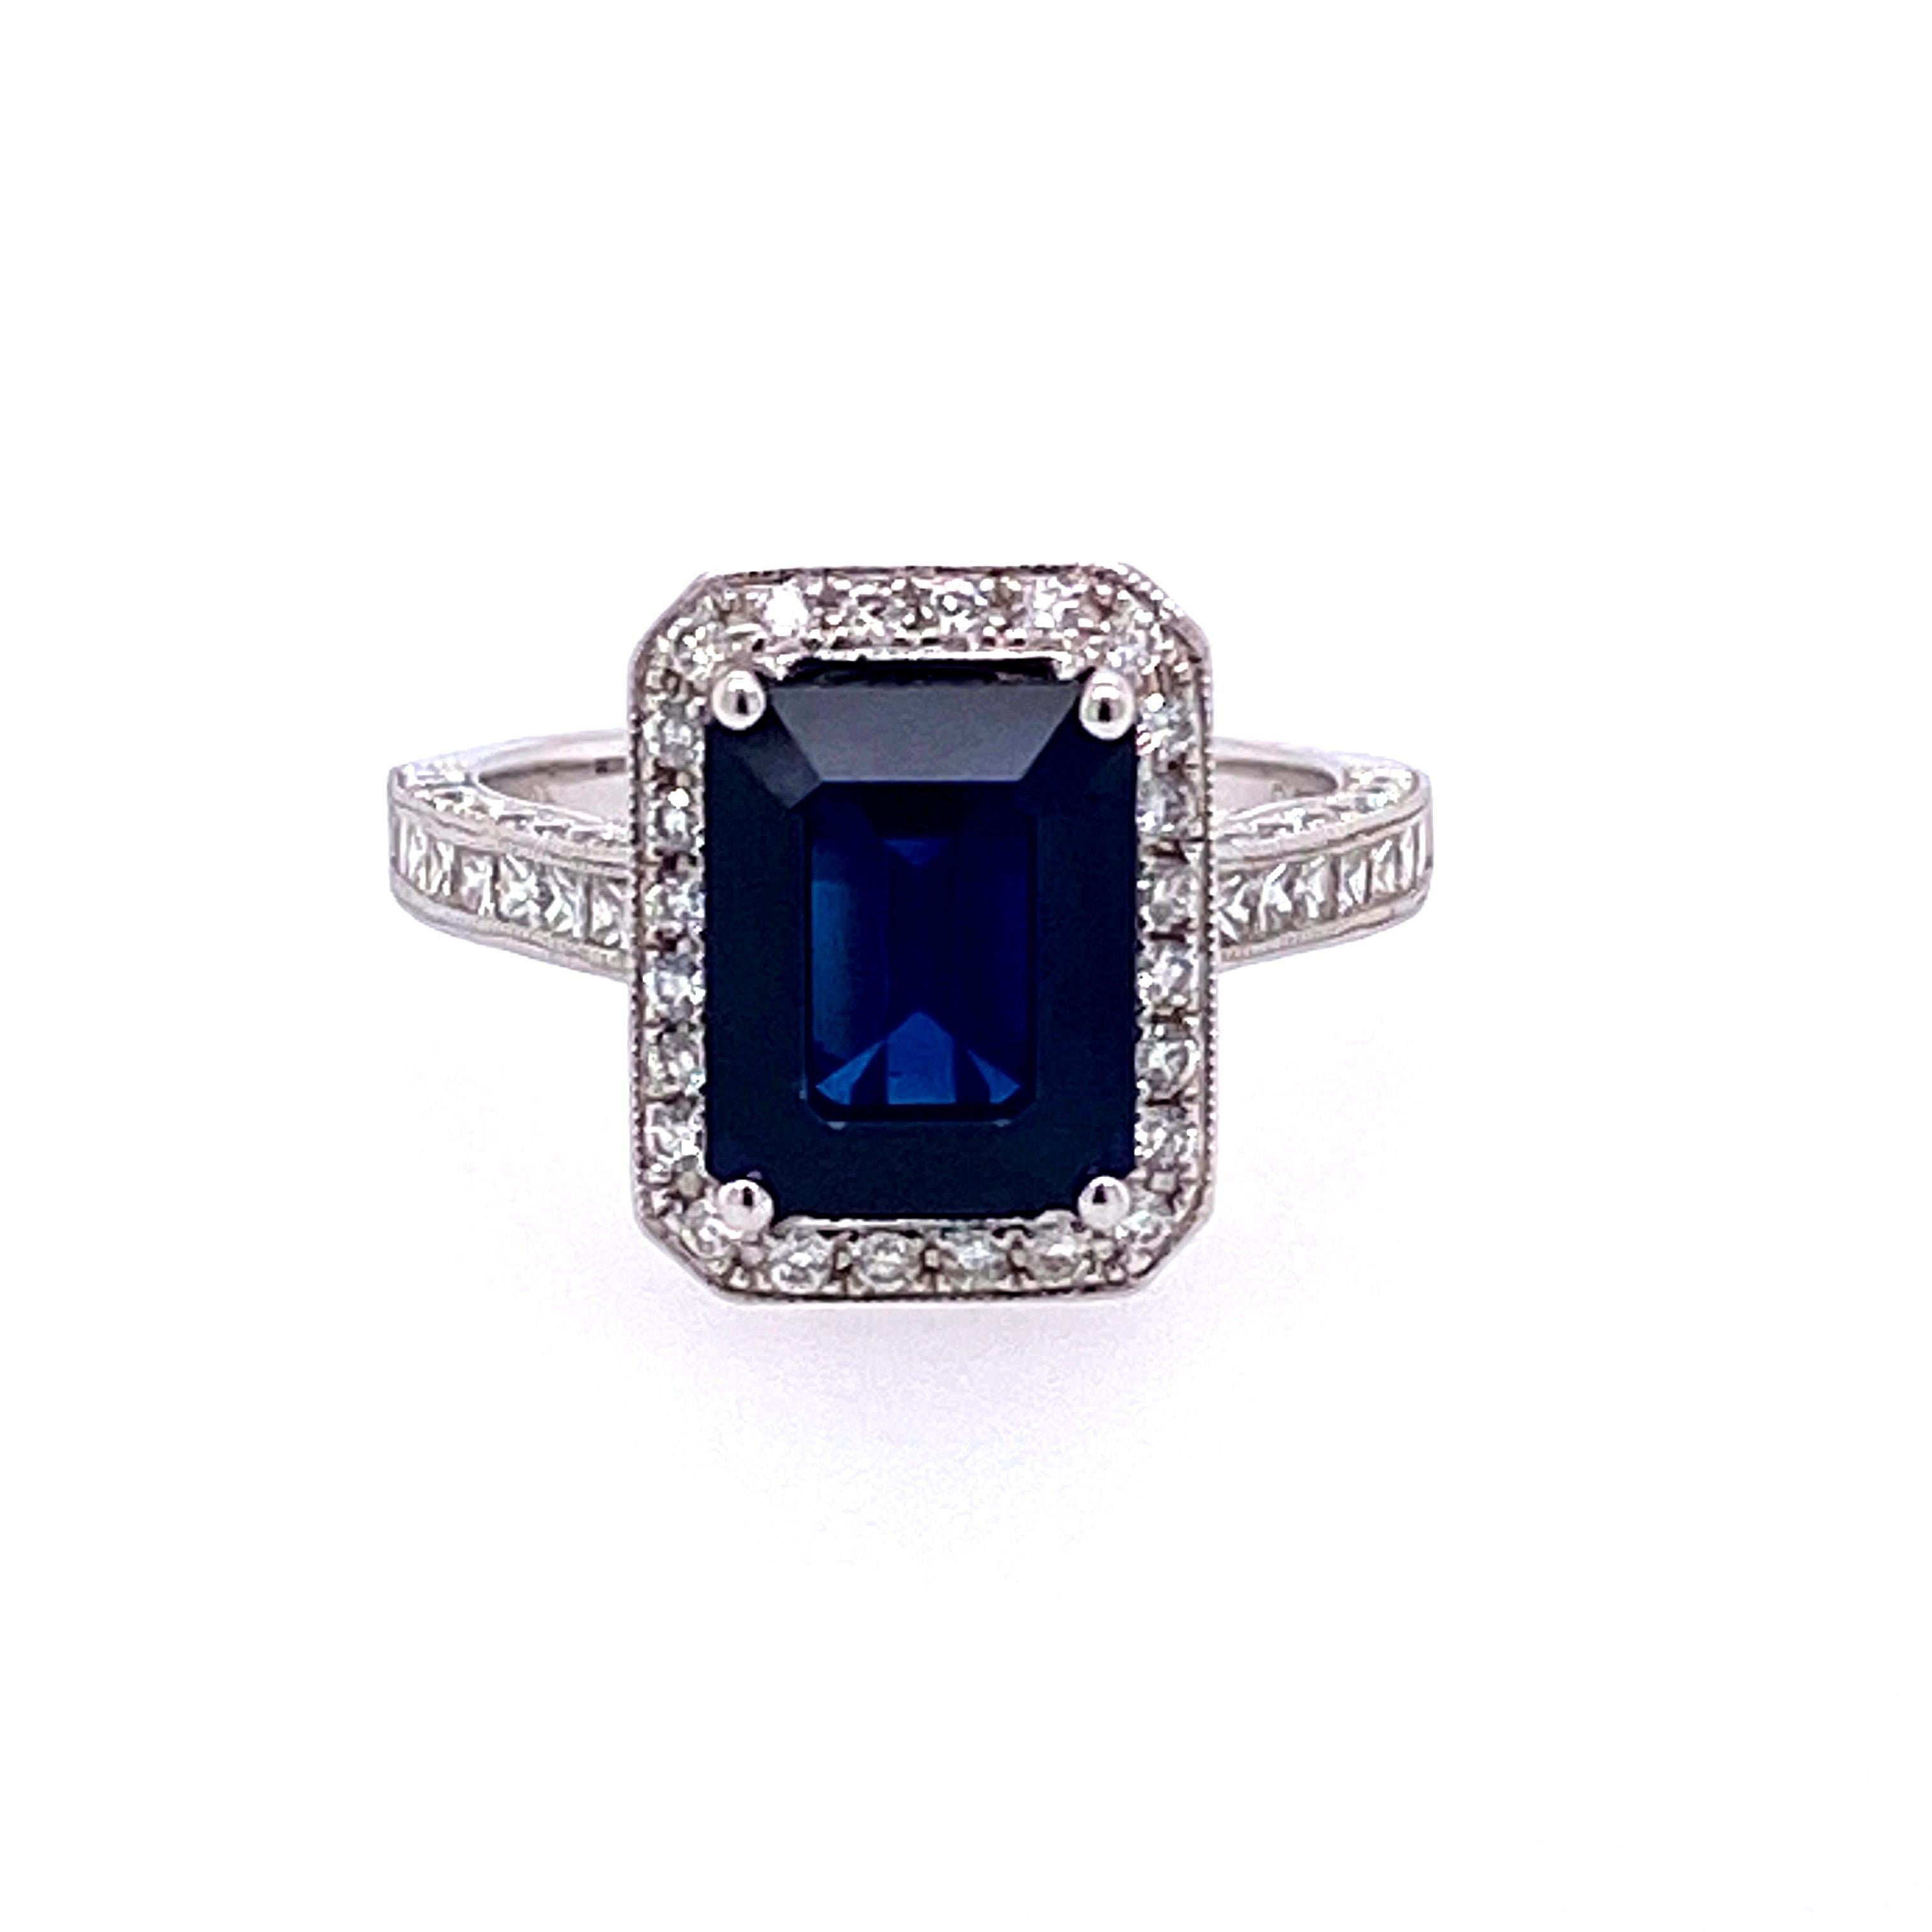 This stunning cocktail ring features a 3.97 Carat Emerald Cut Sapphire with a Diamond Halo. The Sapphire sits on a Diamond Shank and is set in 18k White Gold. Total Diamond Weight = 0.93 Carats. Ring Size is 6 1/2. 